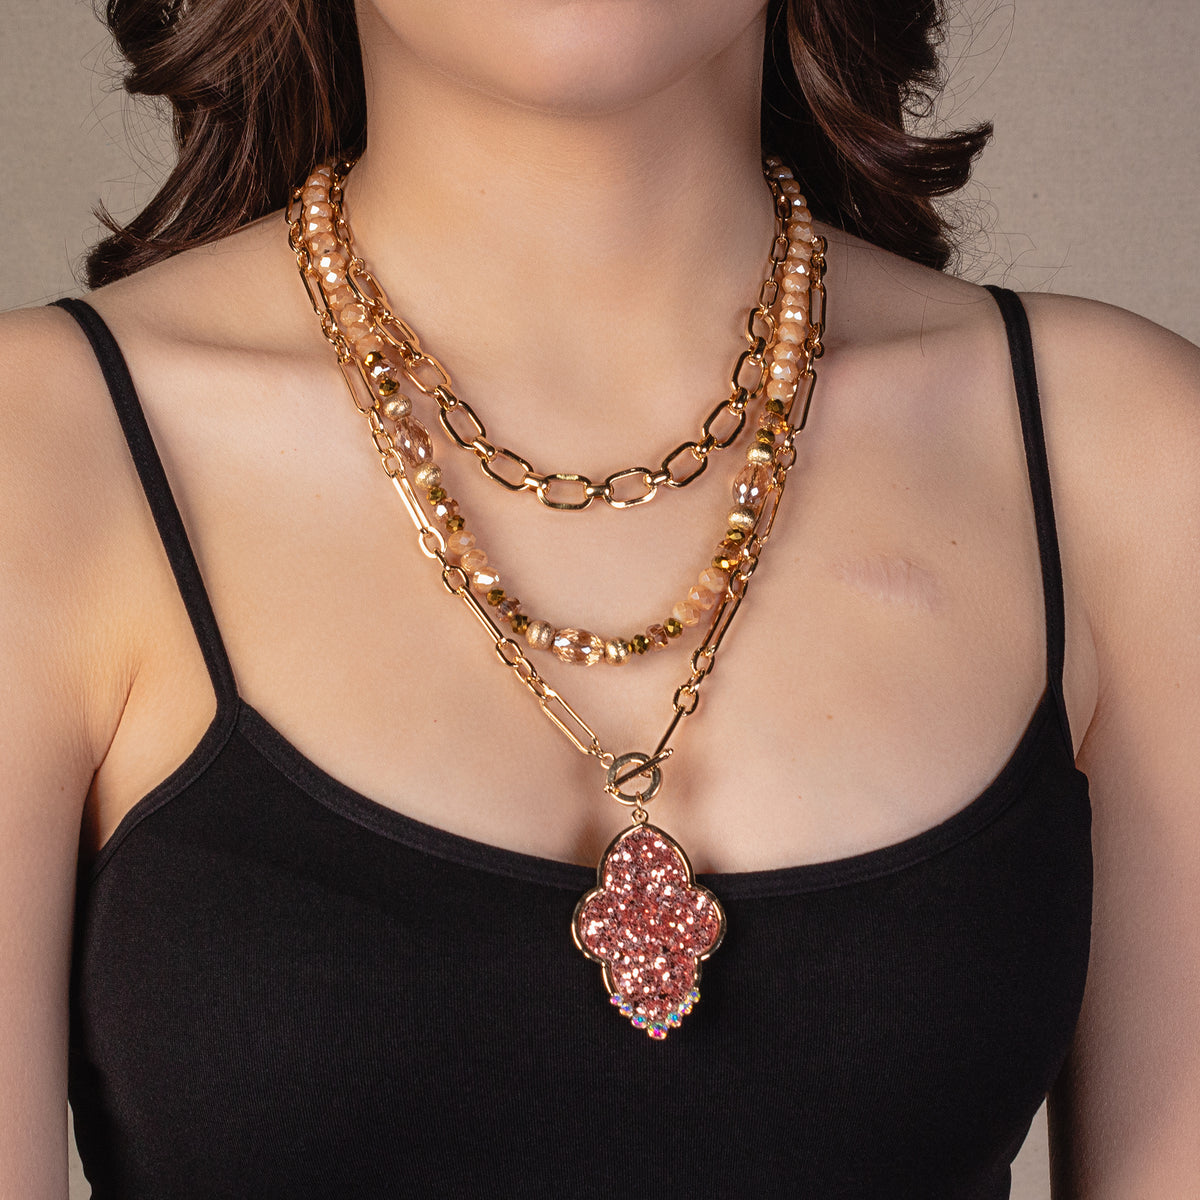 1140 - Layered Chain Glitter Pendant Necklace - Rose Gold